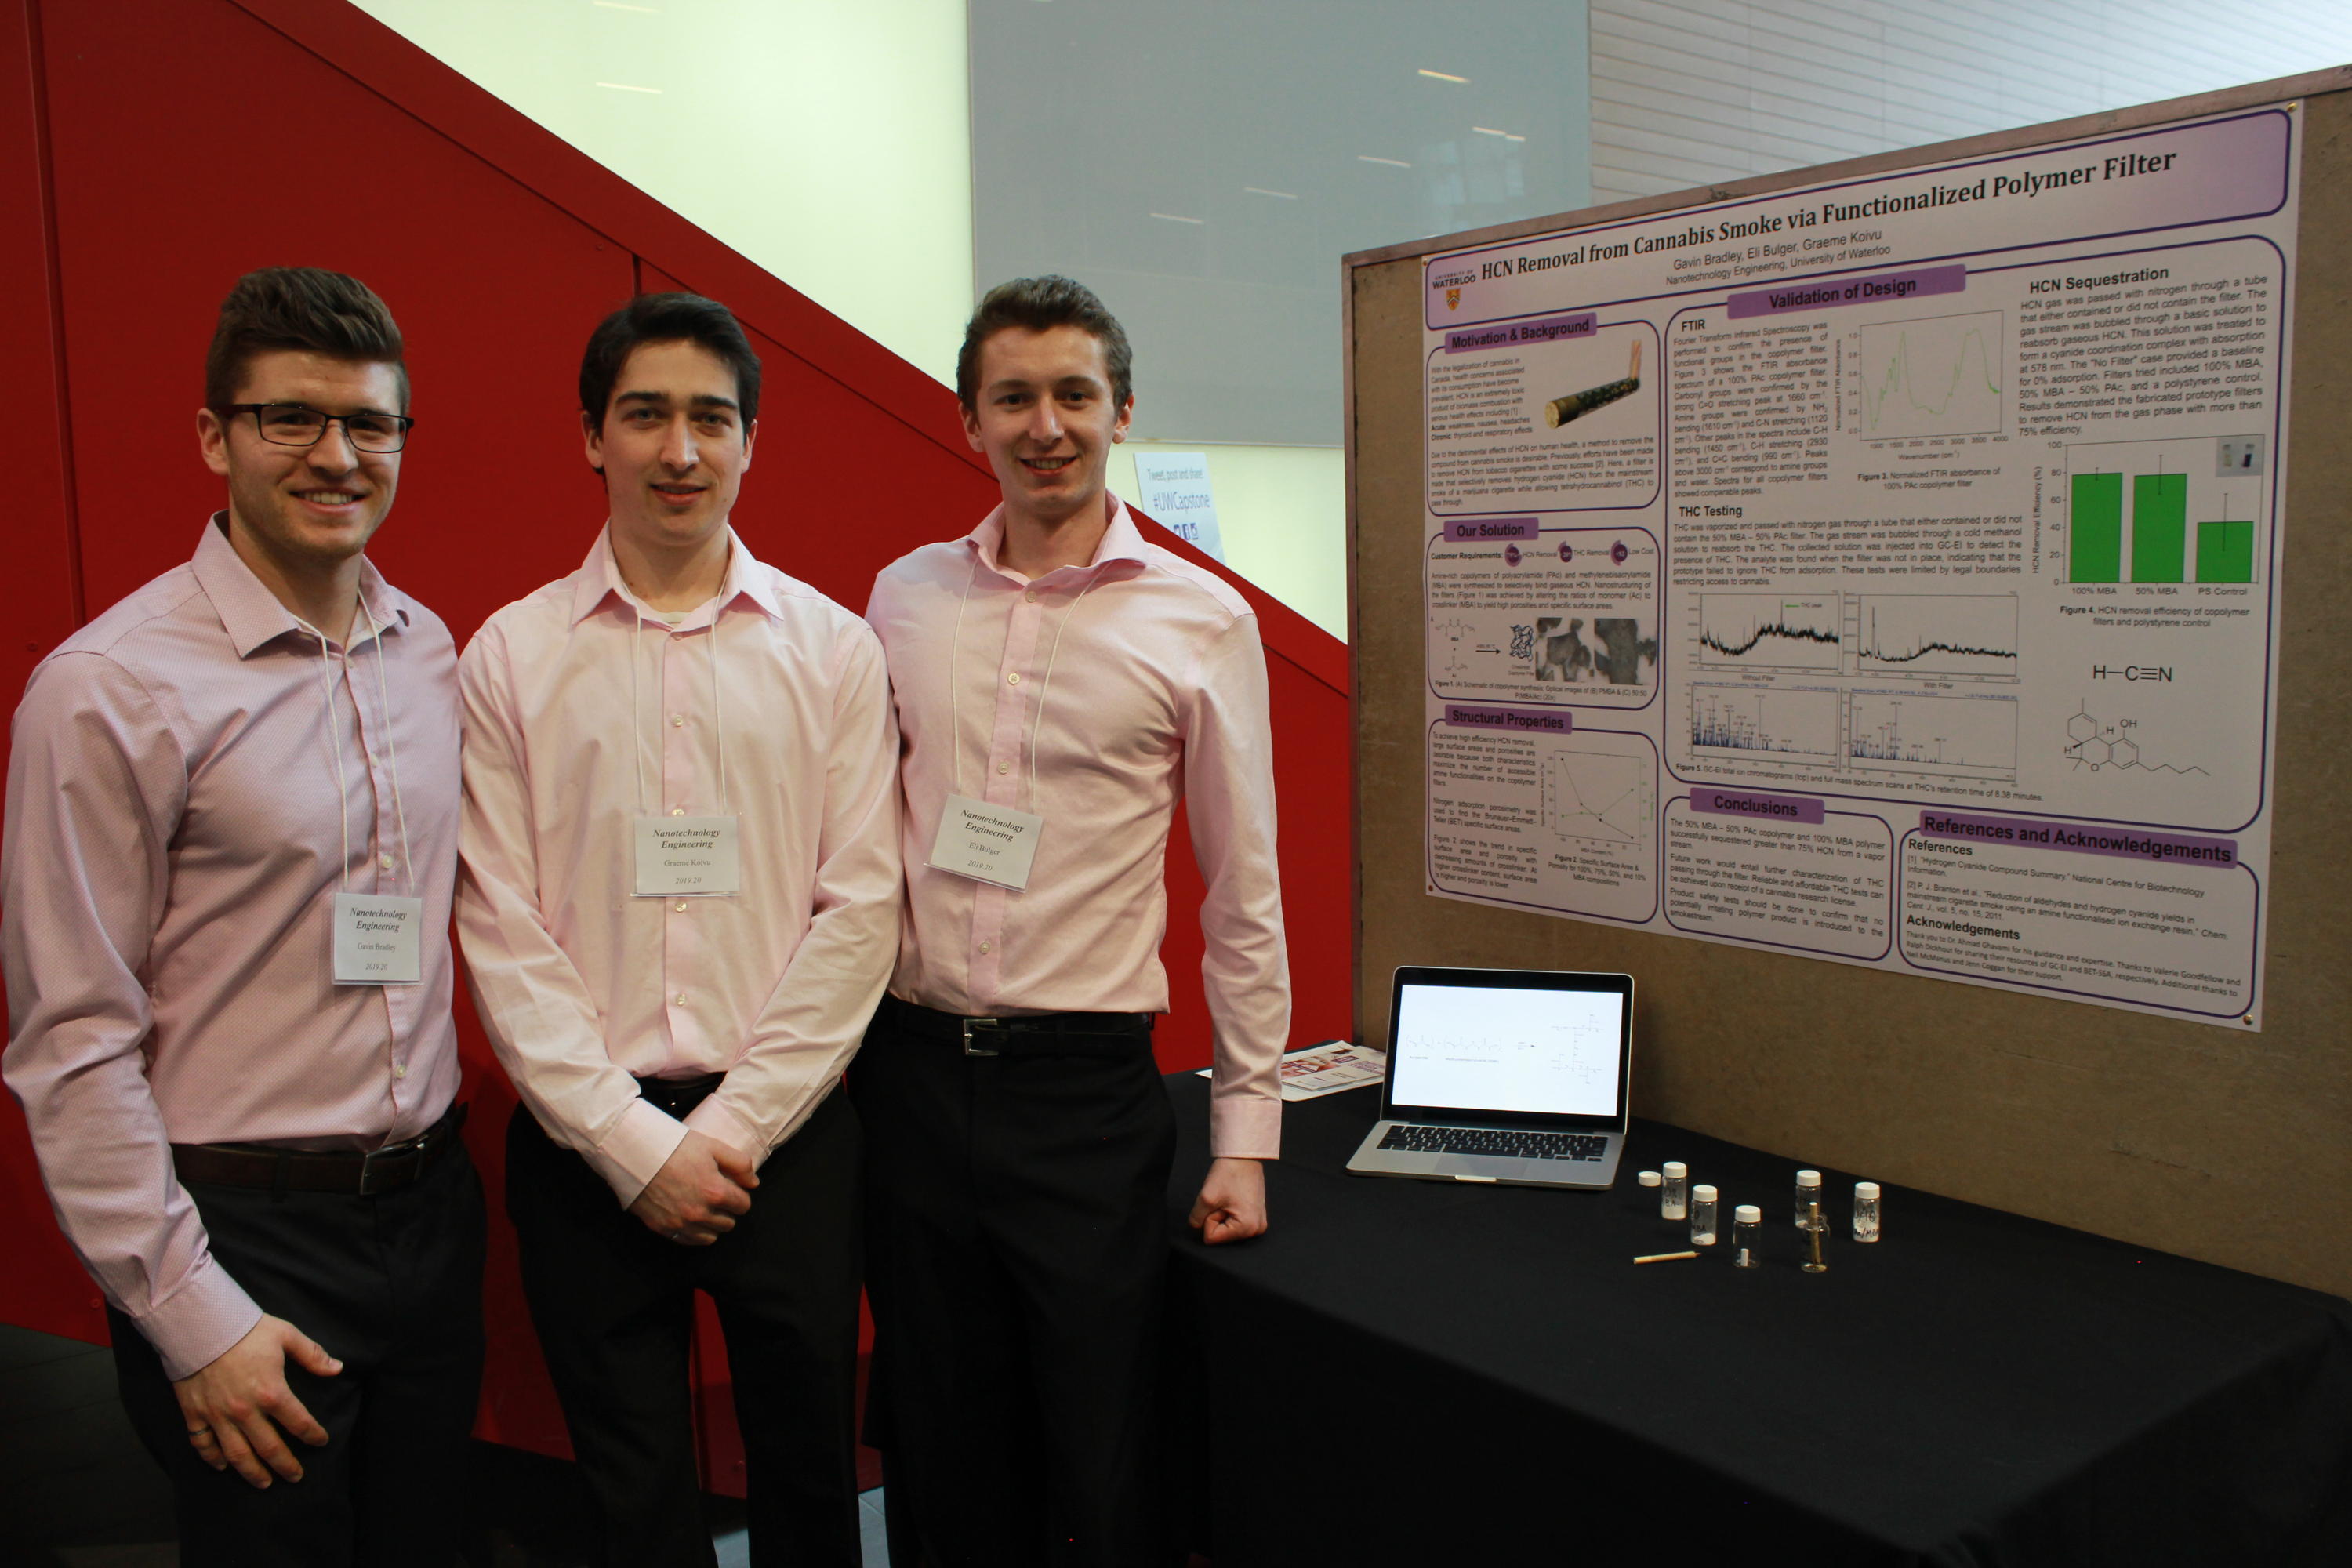 Team 20 students with their project poster at the 2019 Capstone Design Symposium.